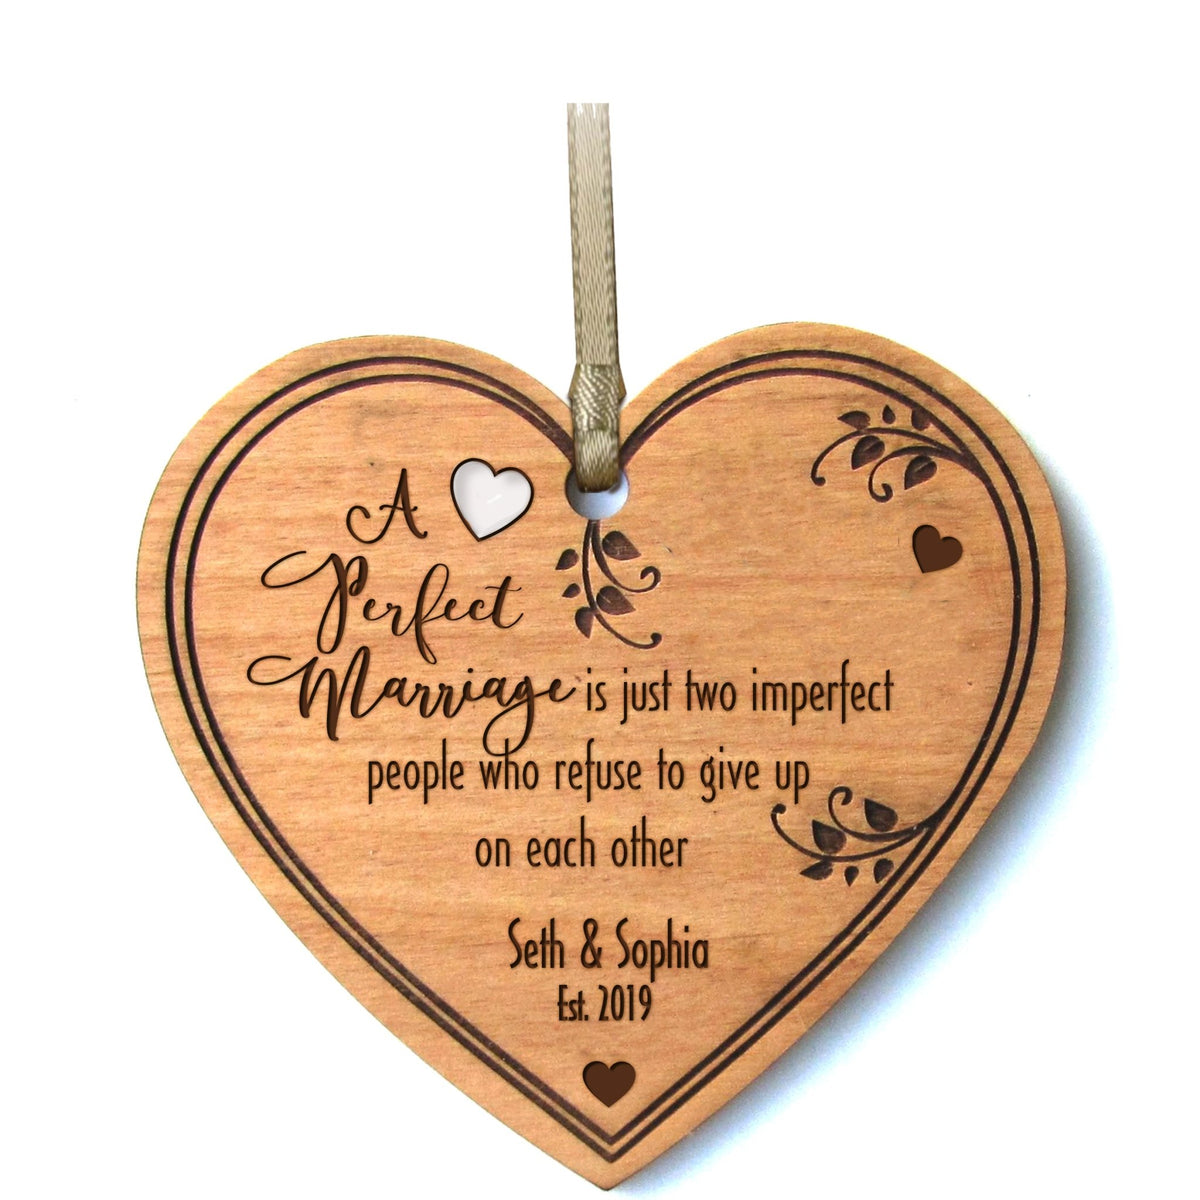 Personalized Wedding Anniversary Heart Ornament Gifts for Couple - A Perfect Marriage - LifeSong Milestones